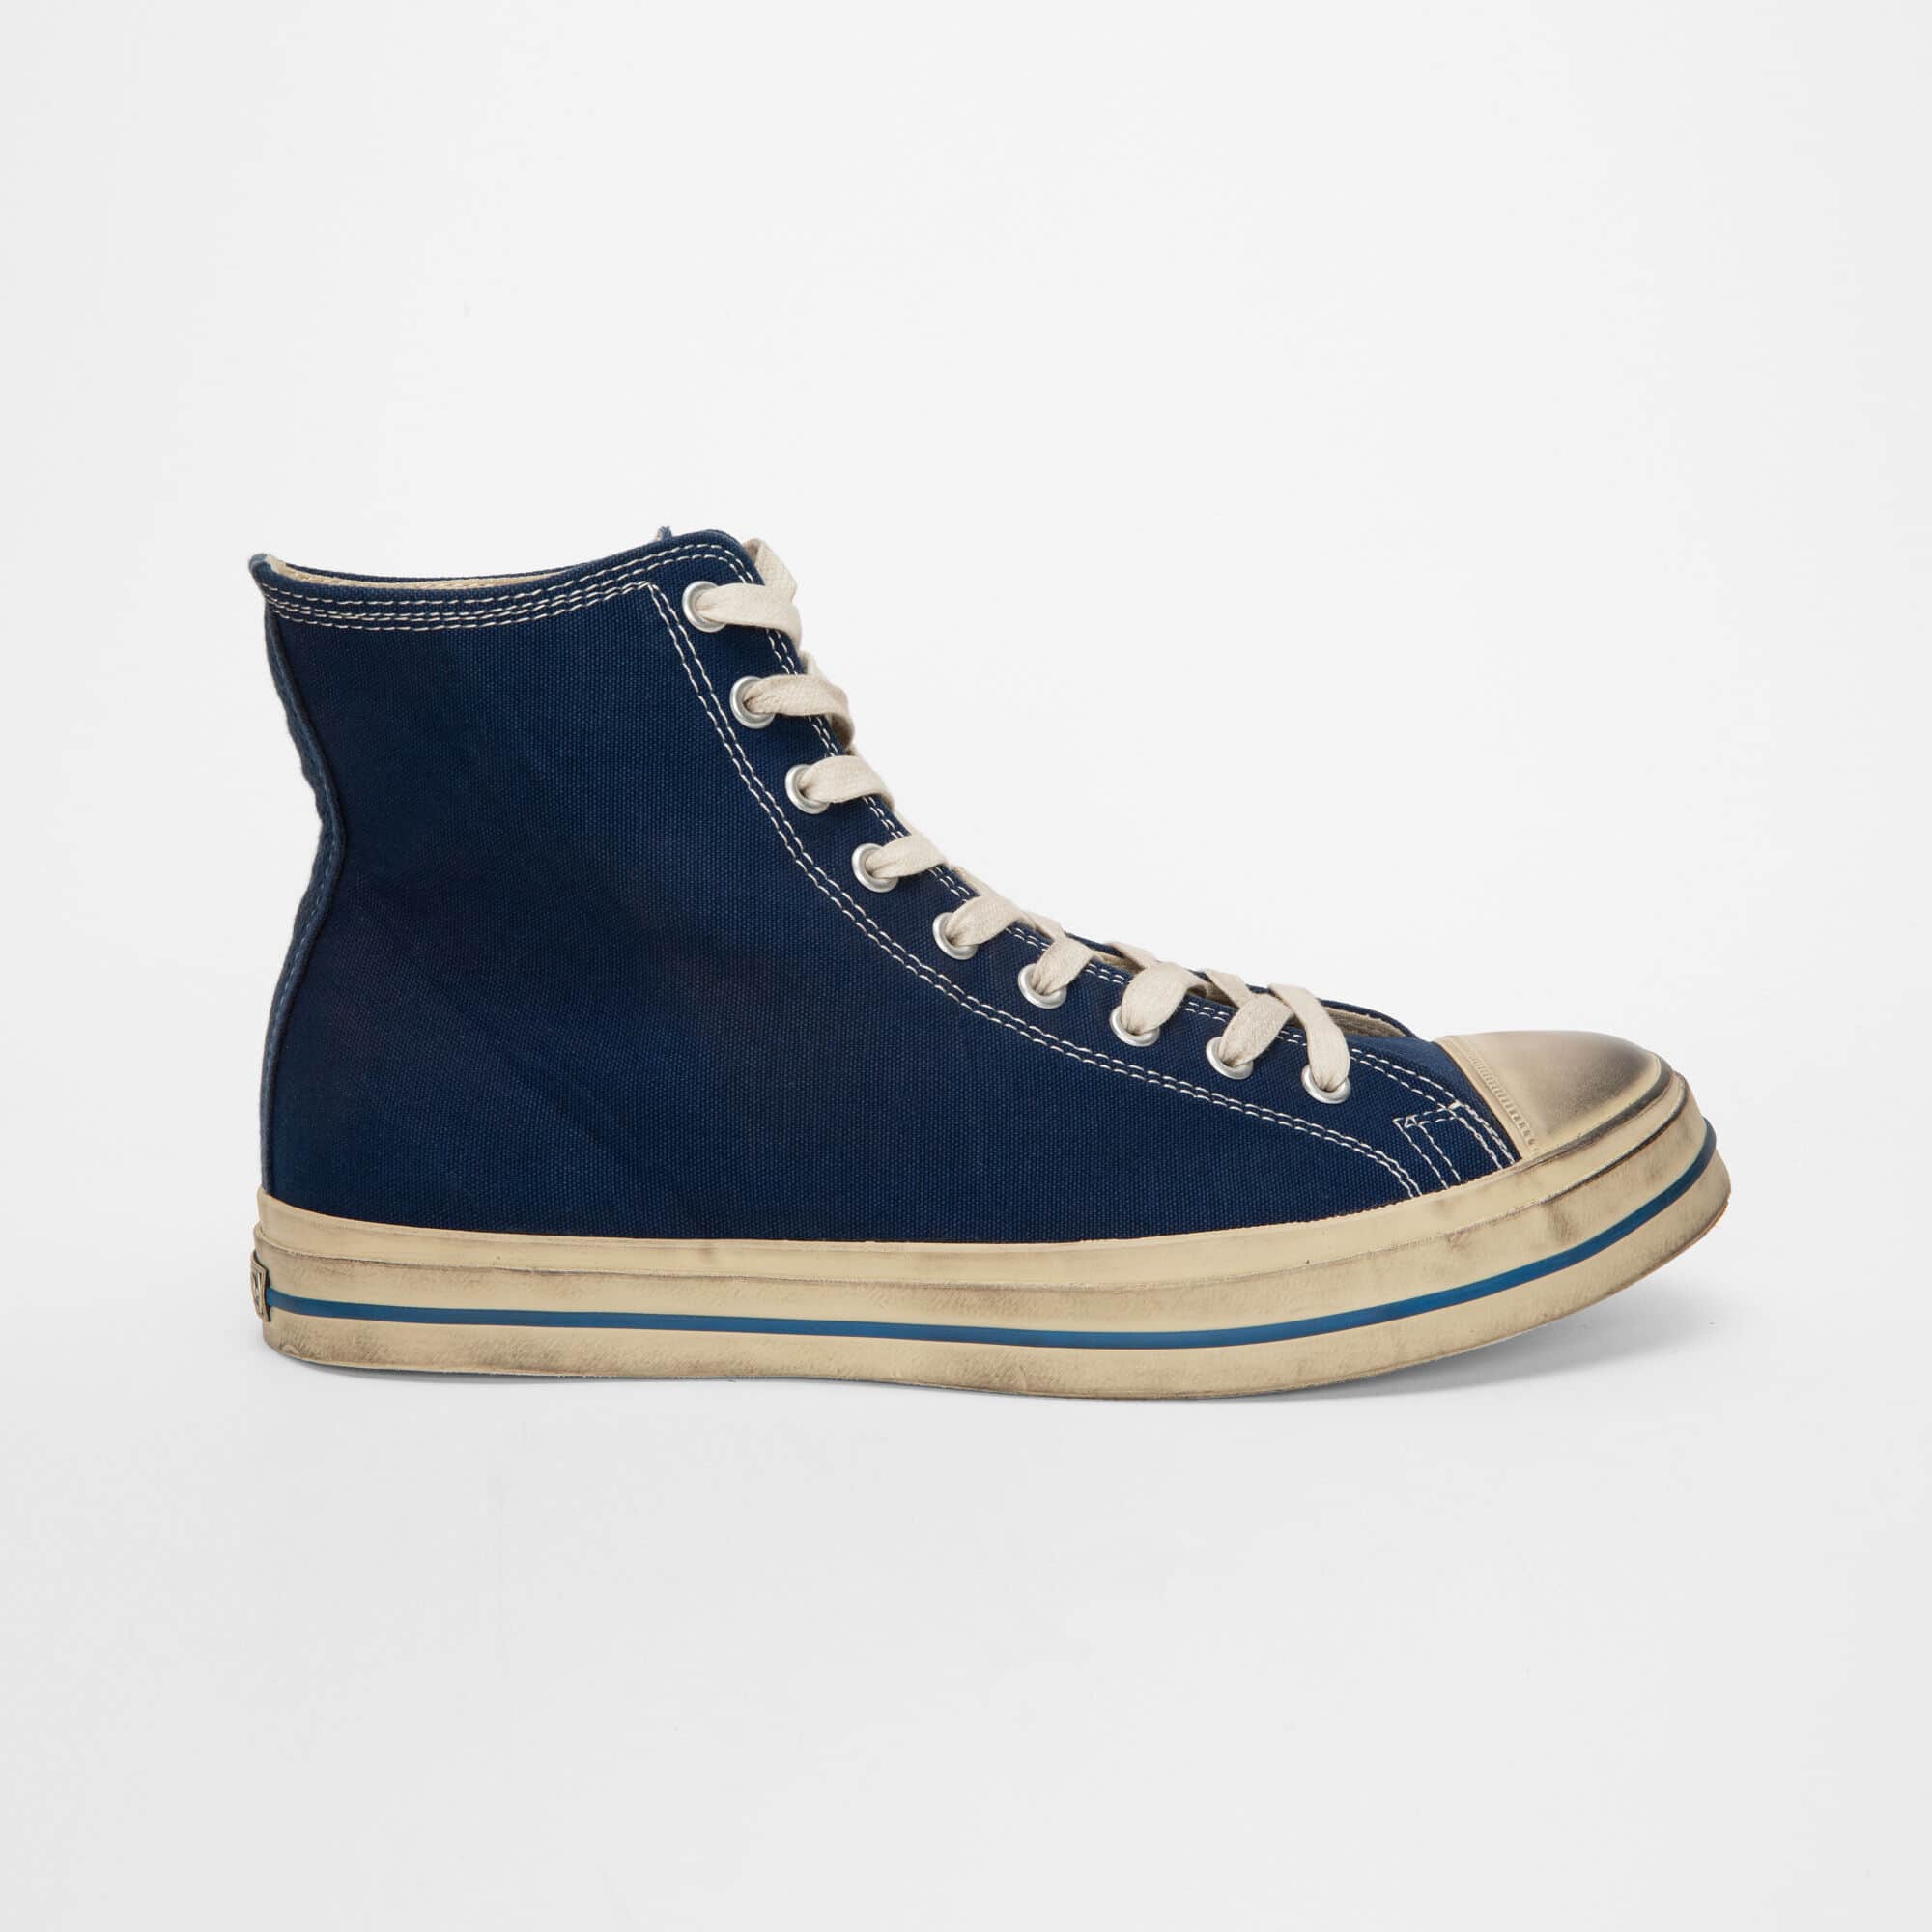 HOOD 1955 Conference High Cut Sneakers Loyal Blue